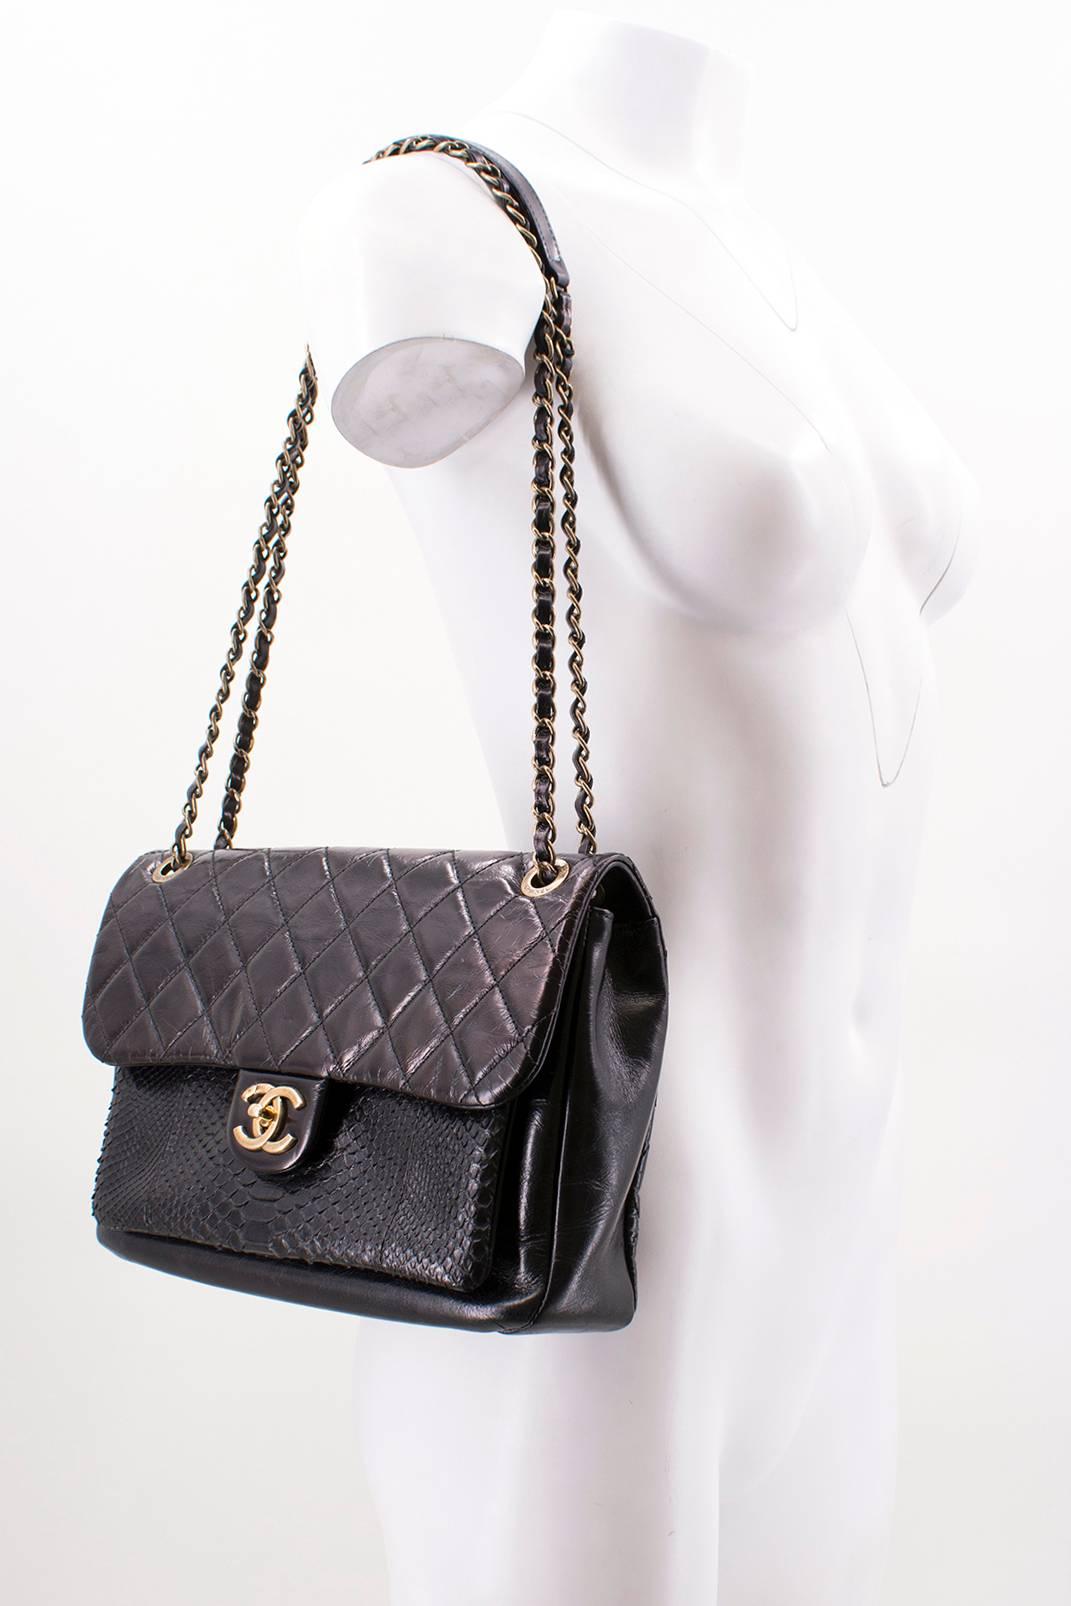 Chanel Black Classic Flap Bag with Snakeskin Exterior Pocket For Sale 4